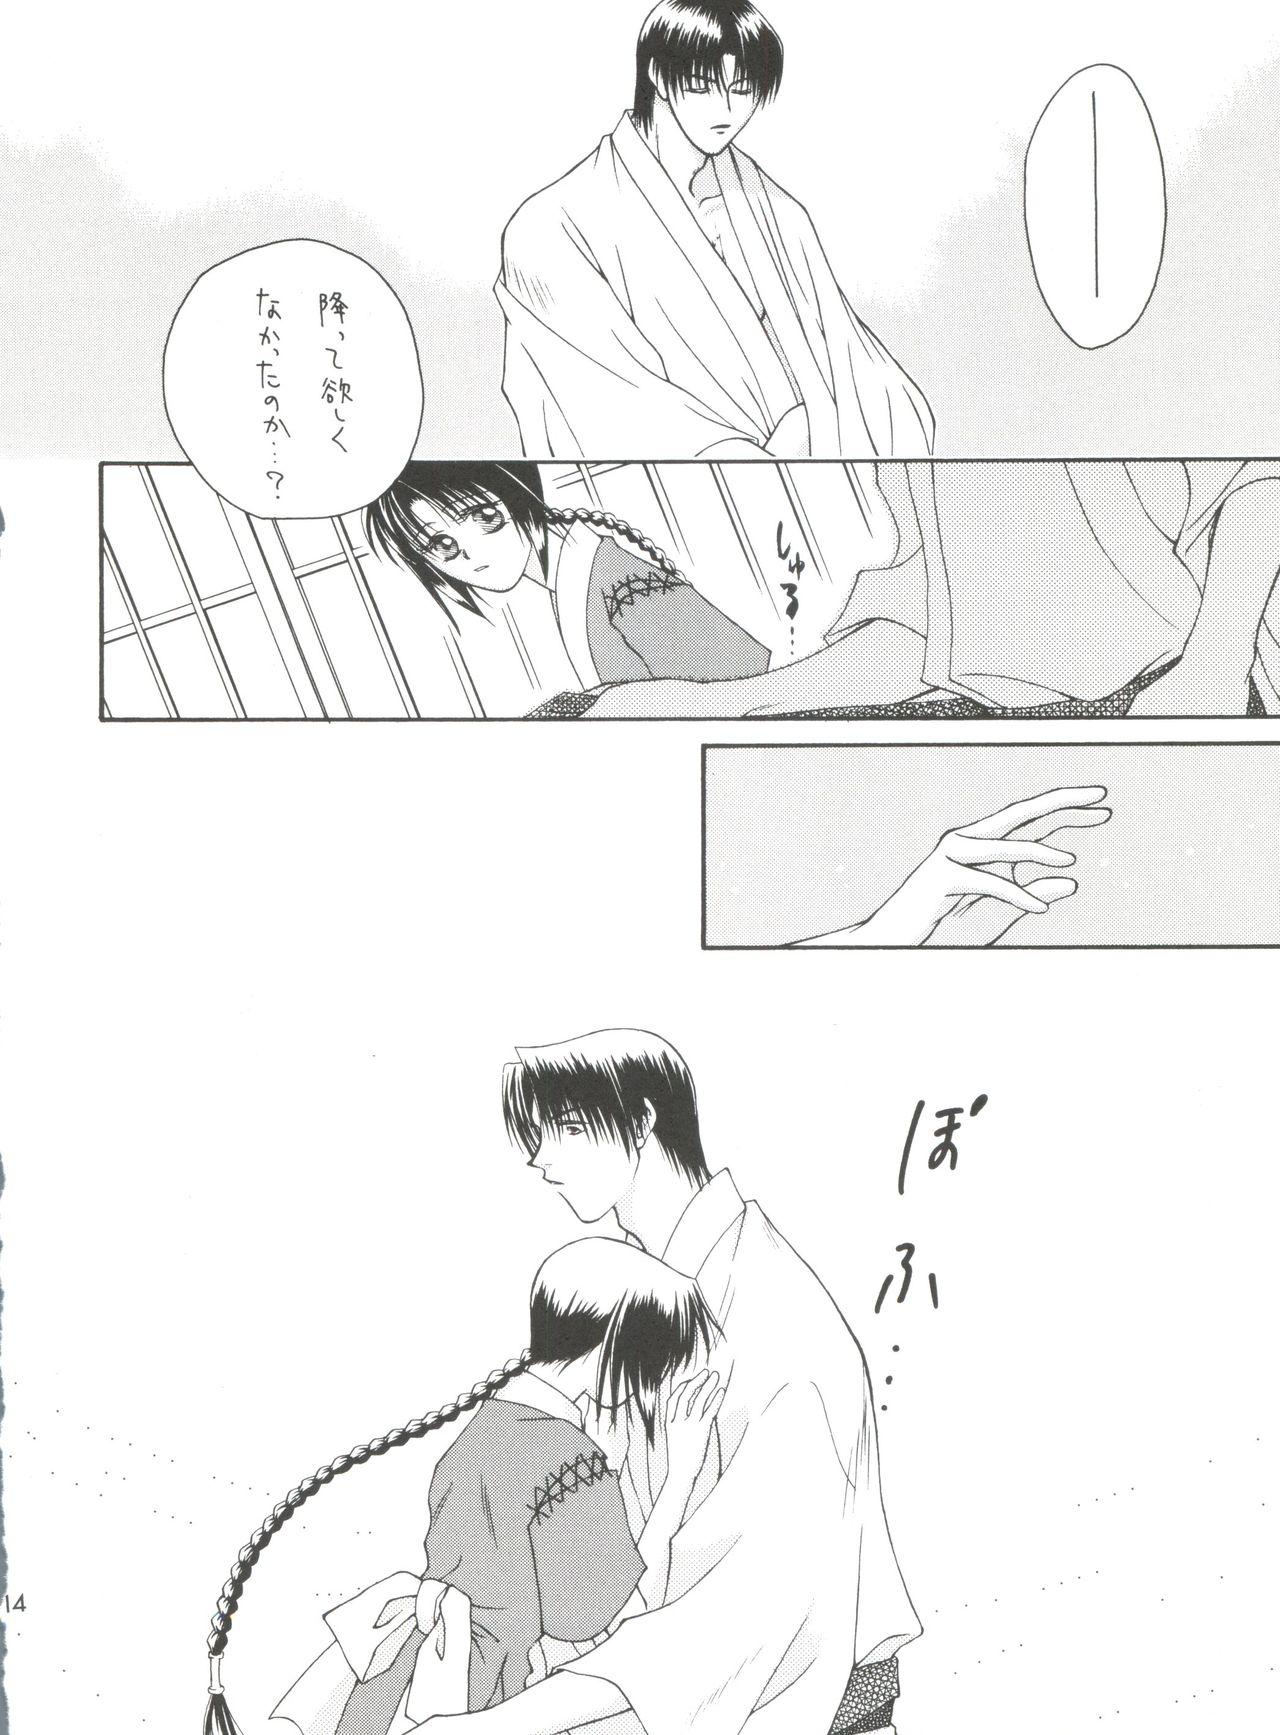 Ejaculation replay - Rurouni kenshin Exposed - Page 5